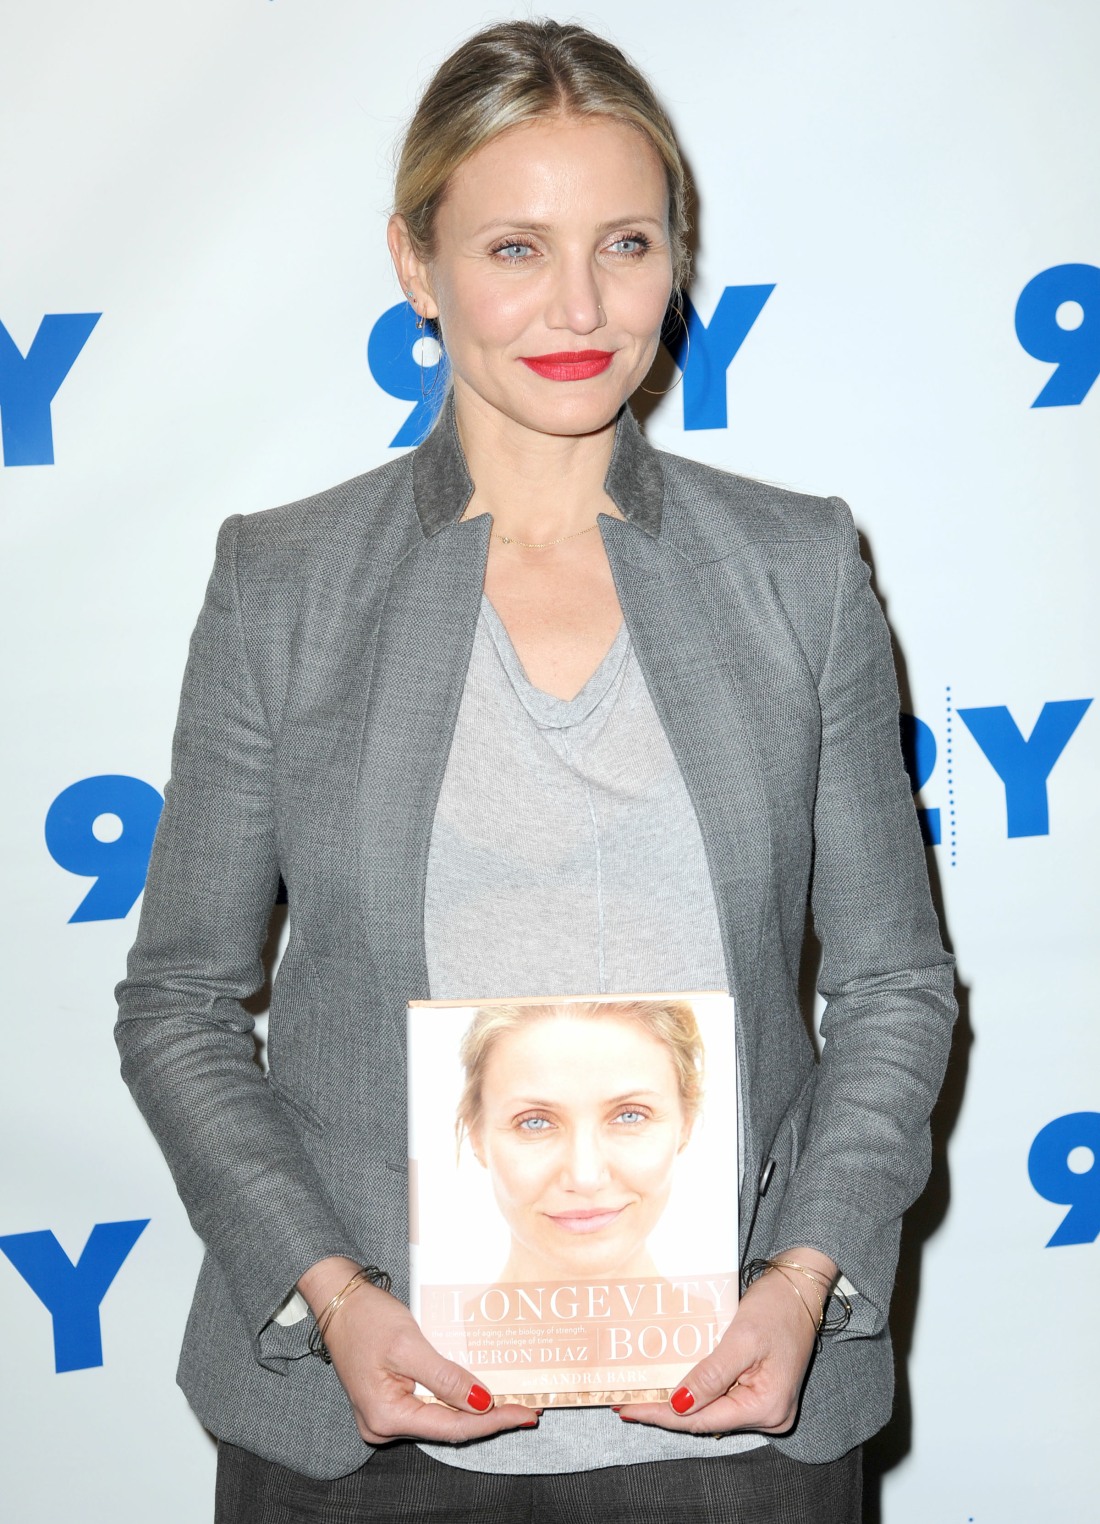 Cameron Diaz at 92nd Street Y on April 5, 2016 in New York City.